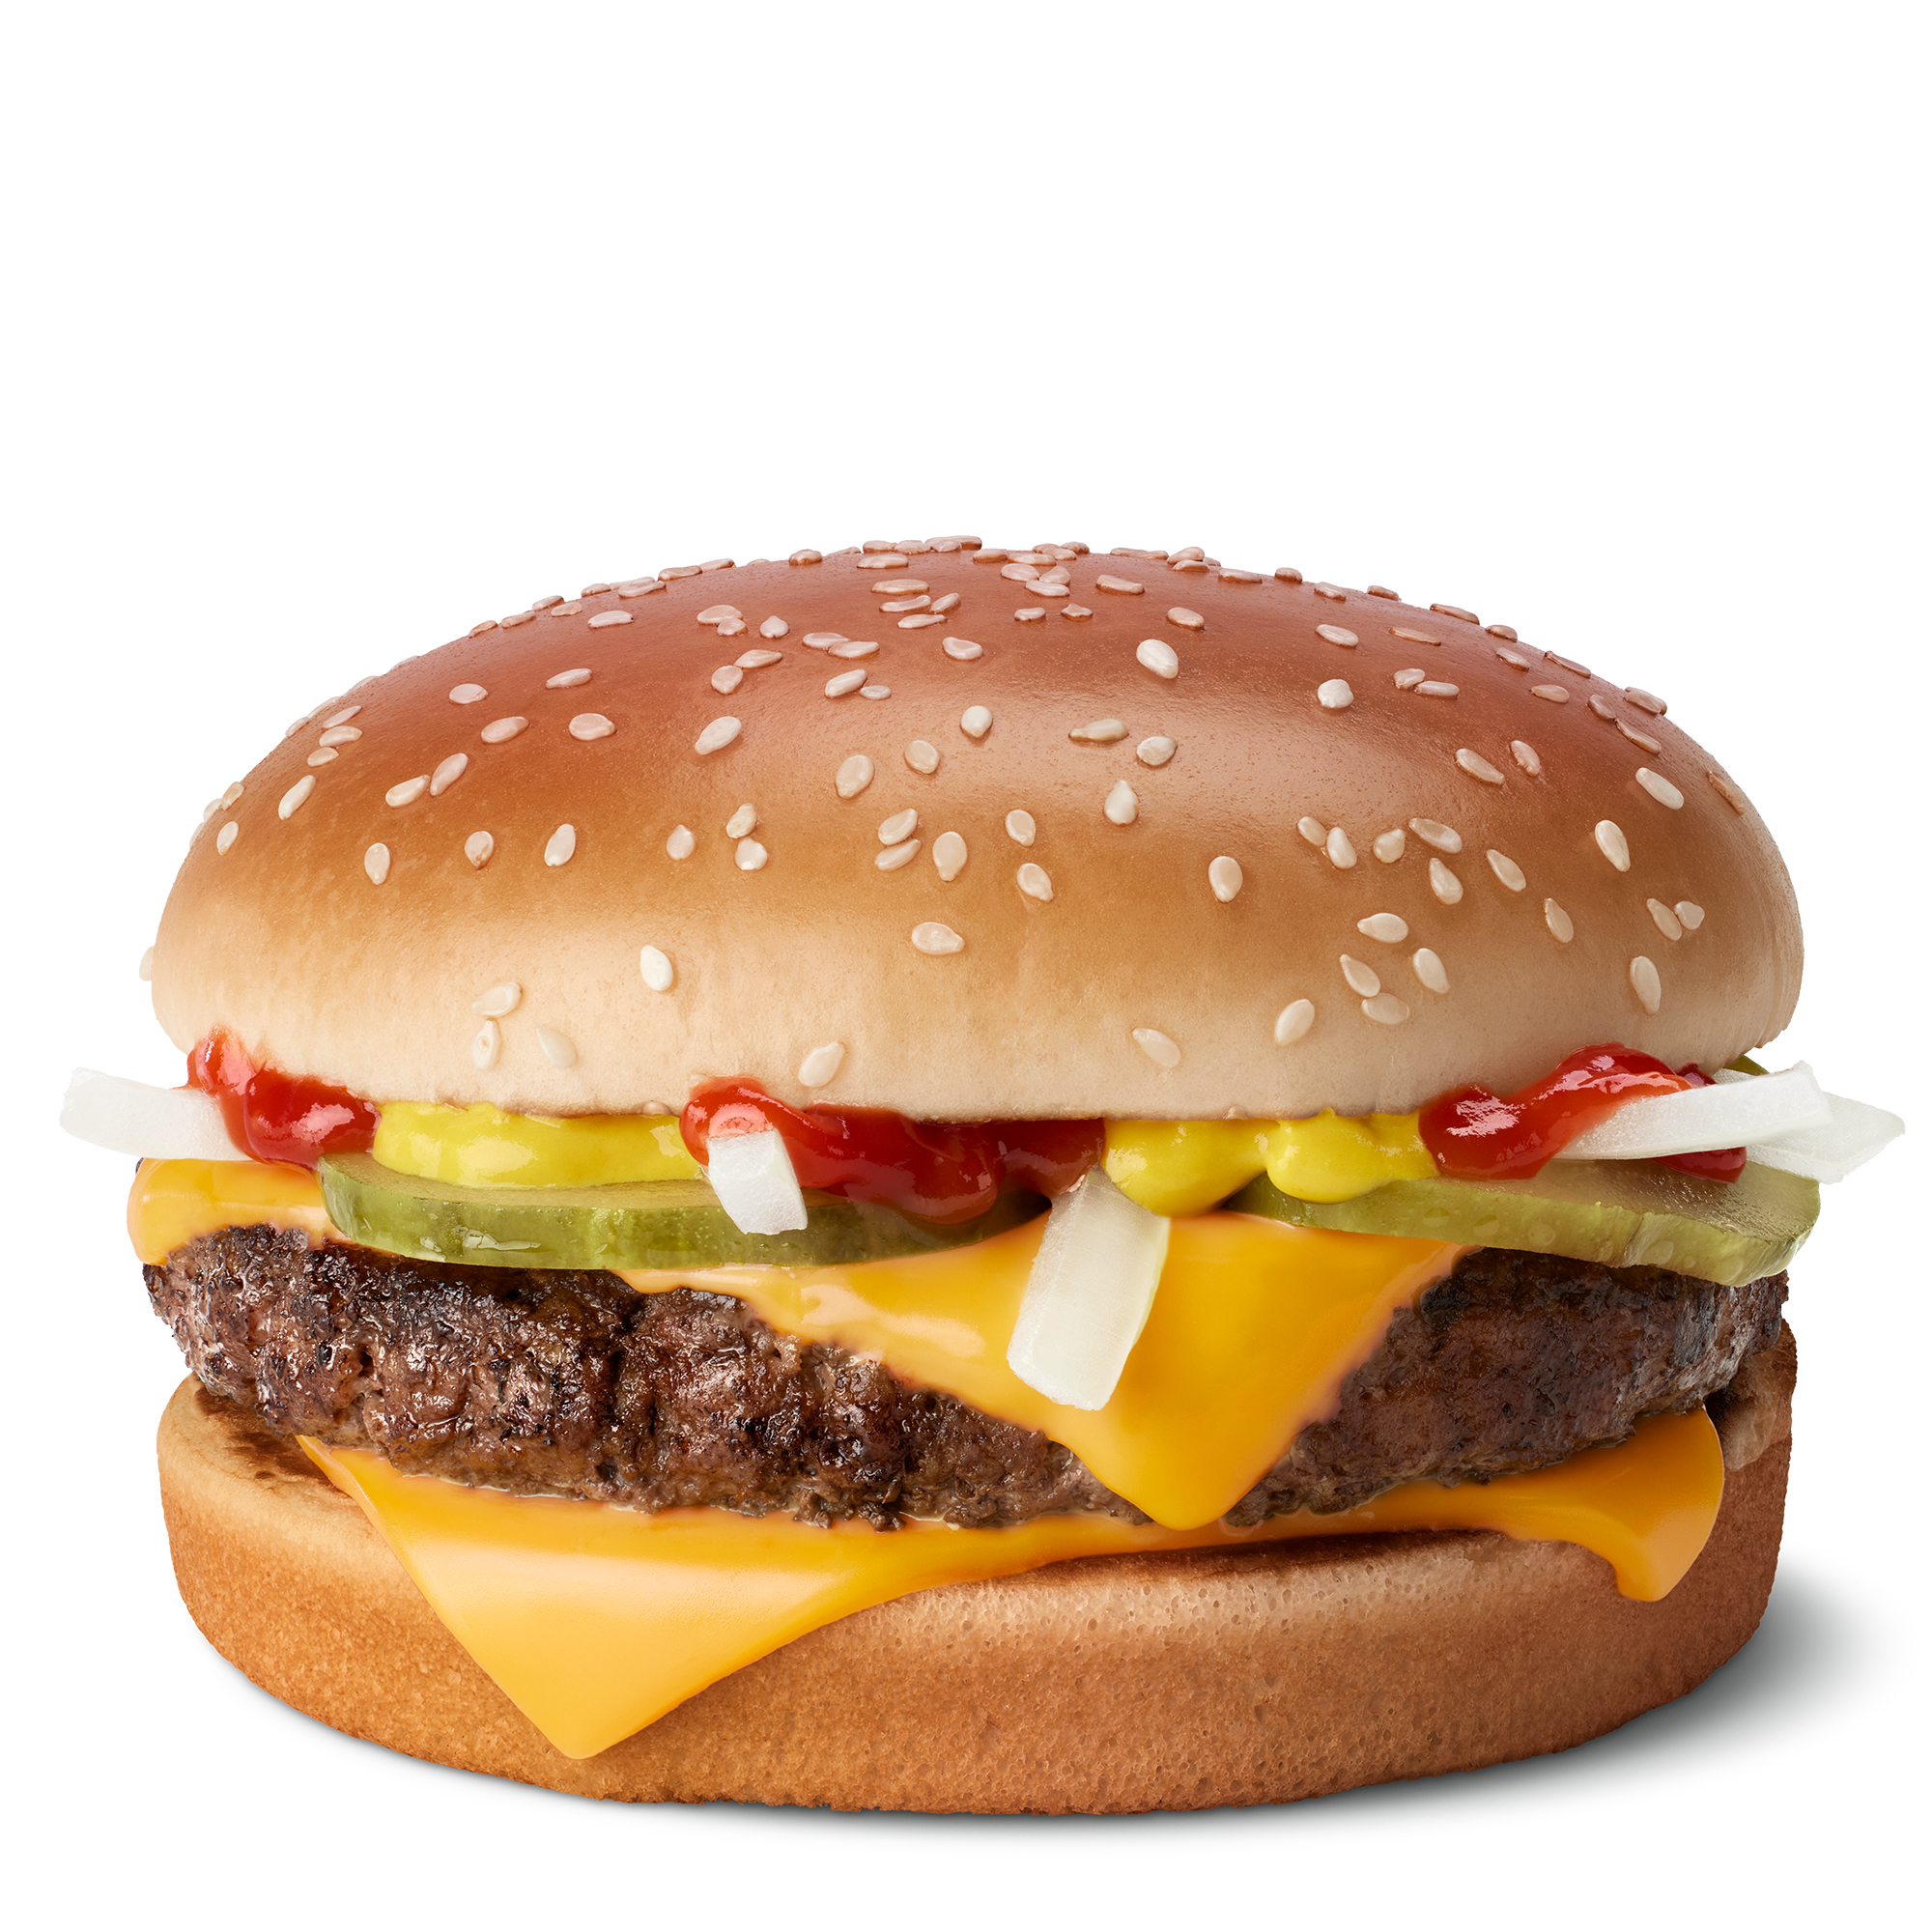 https://hips.hearstapps.com/hmg-prod/images/quarter-pounder-with-cheese-647e48dfb2dd3.png